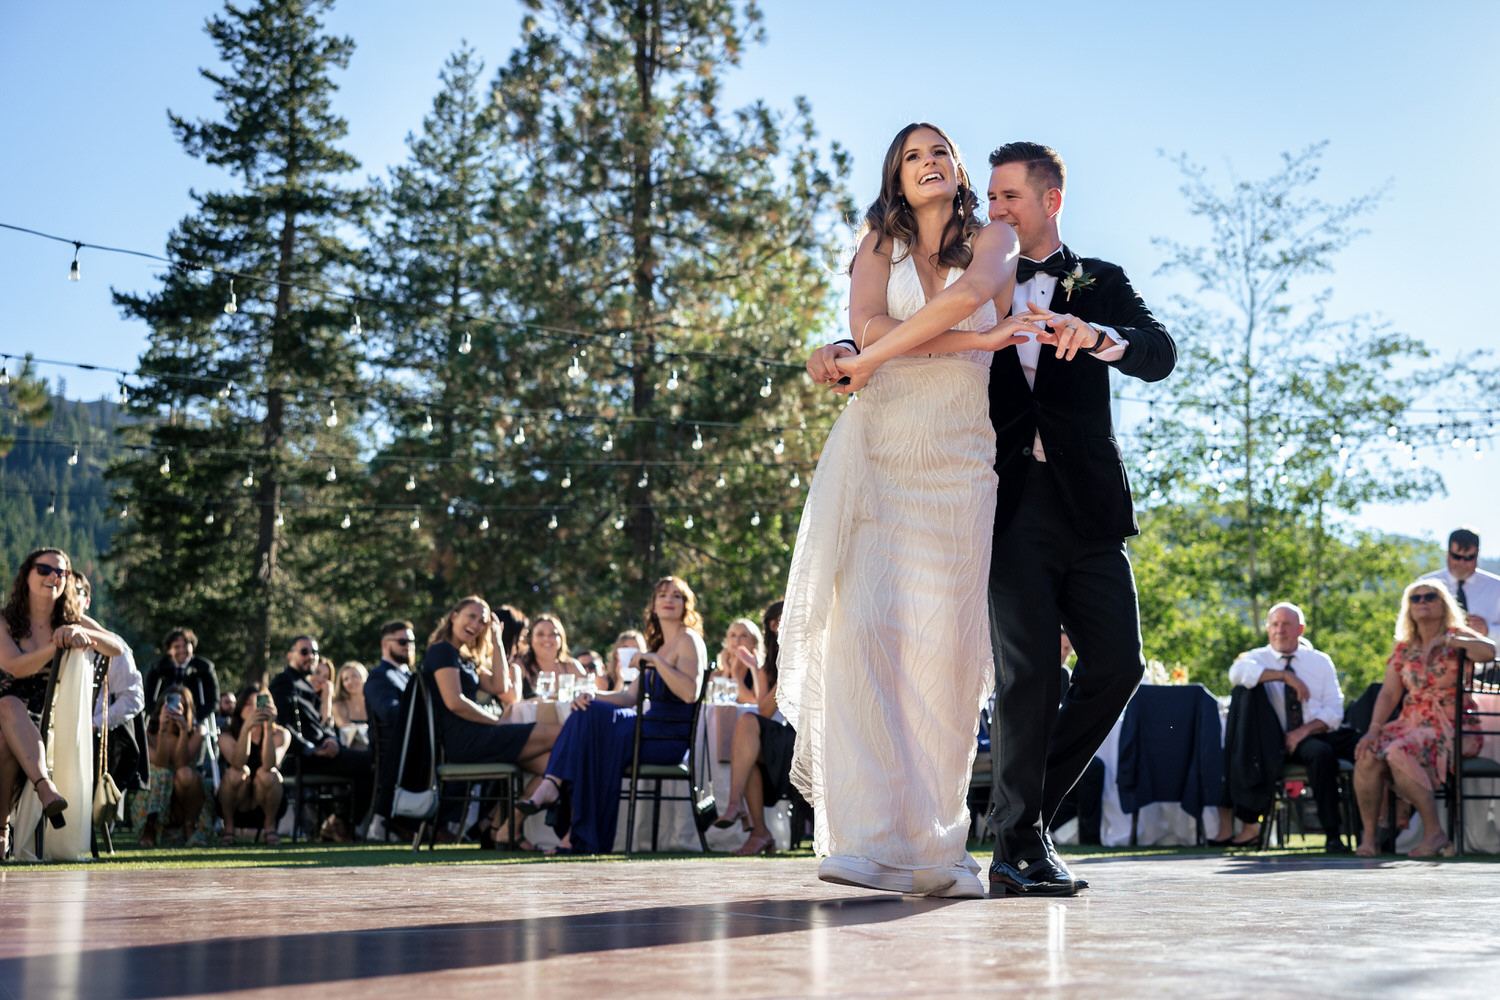 A happy bride and groom enjoy their first dance as husband and wife at an outdoor wedding reception under the pine trees.